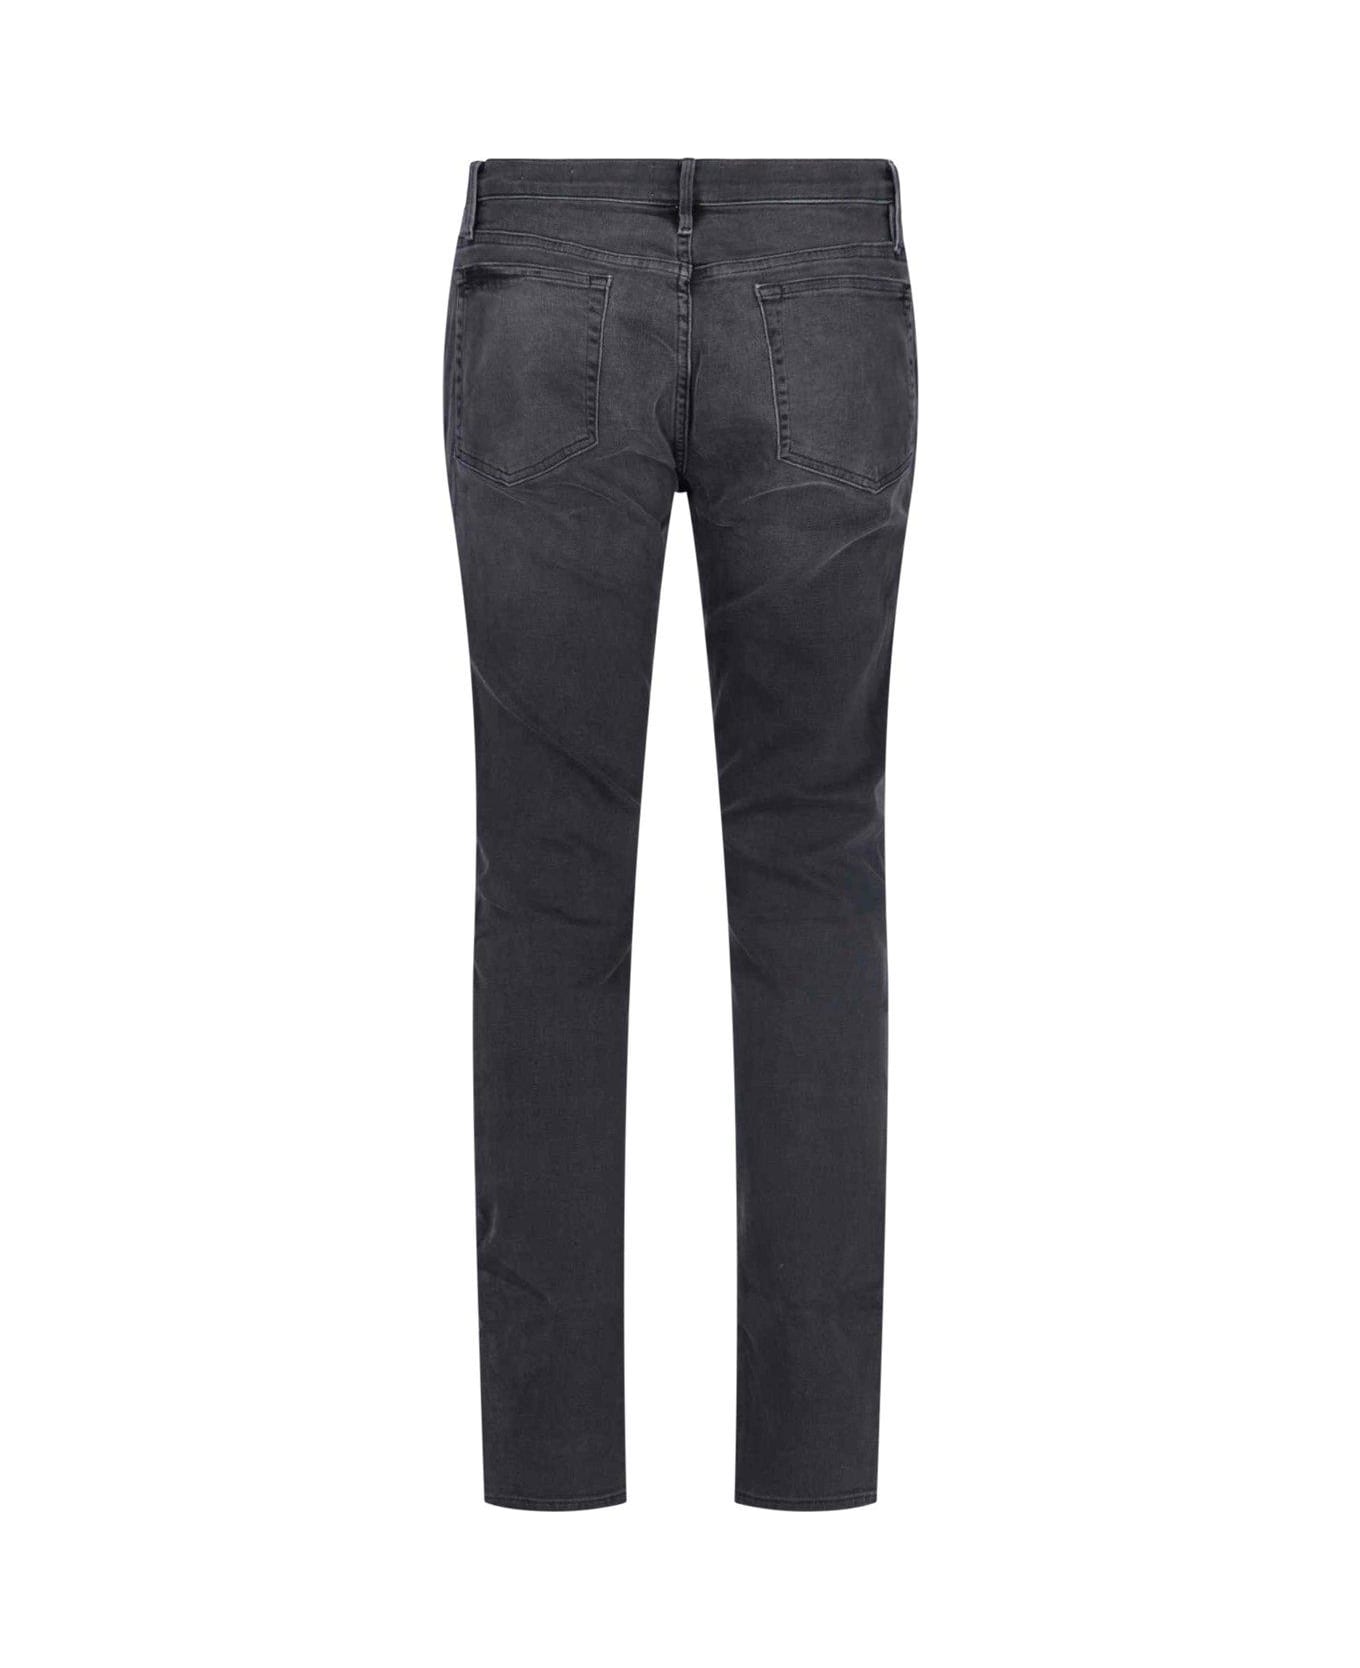 Frame Classic Mid Rise Skinny Jeans